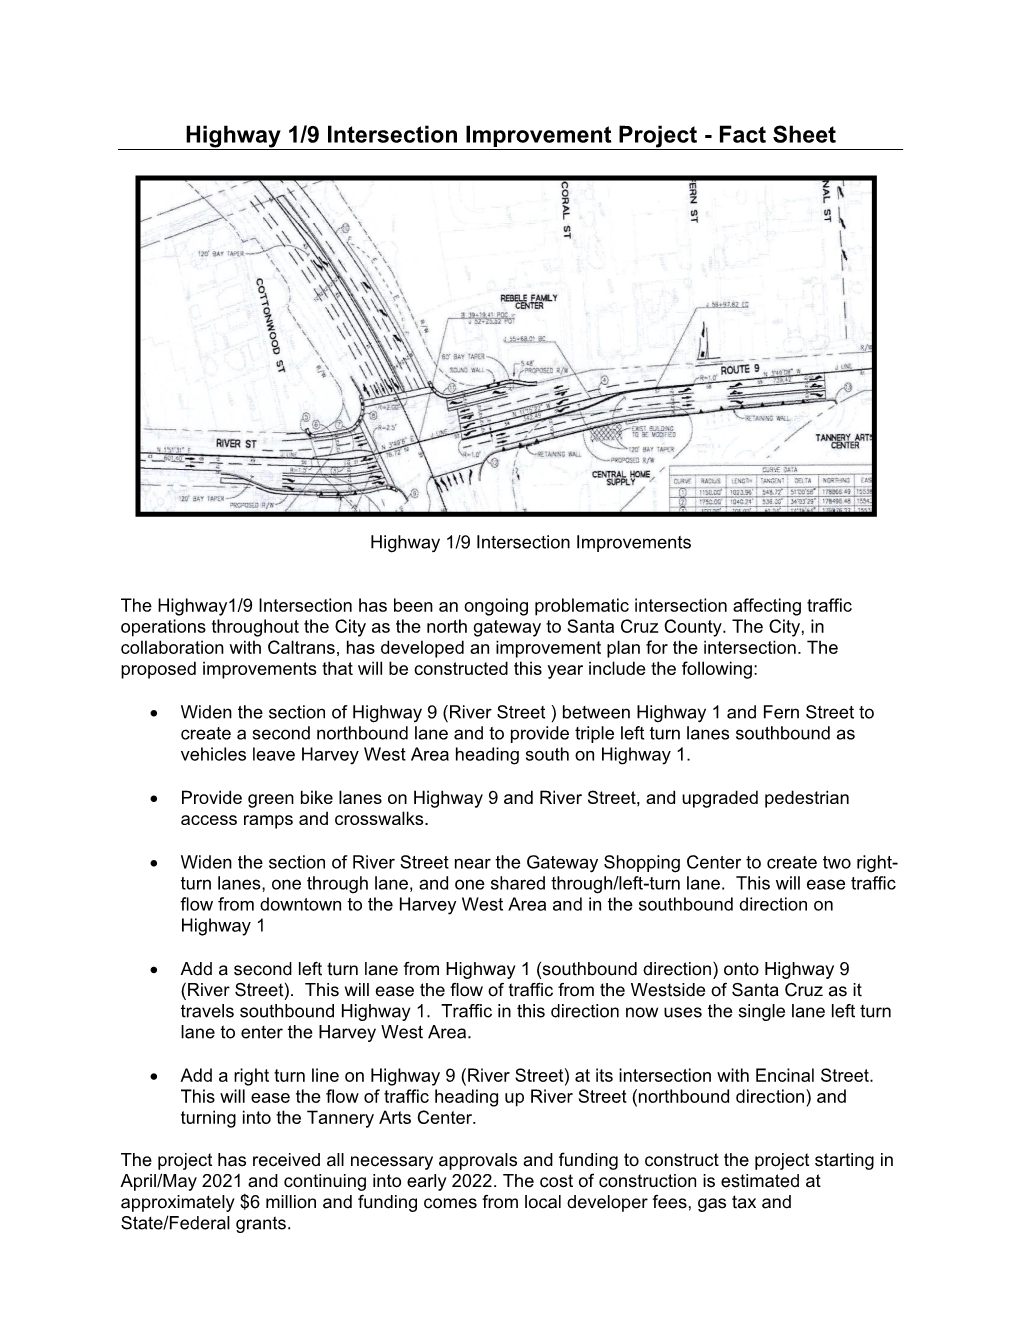 Highway 1/9 Intersection Improvement Project - Fact Sheet